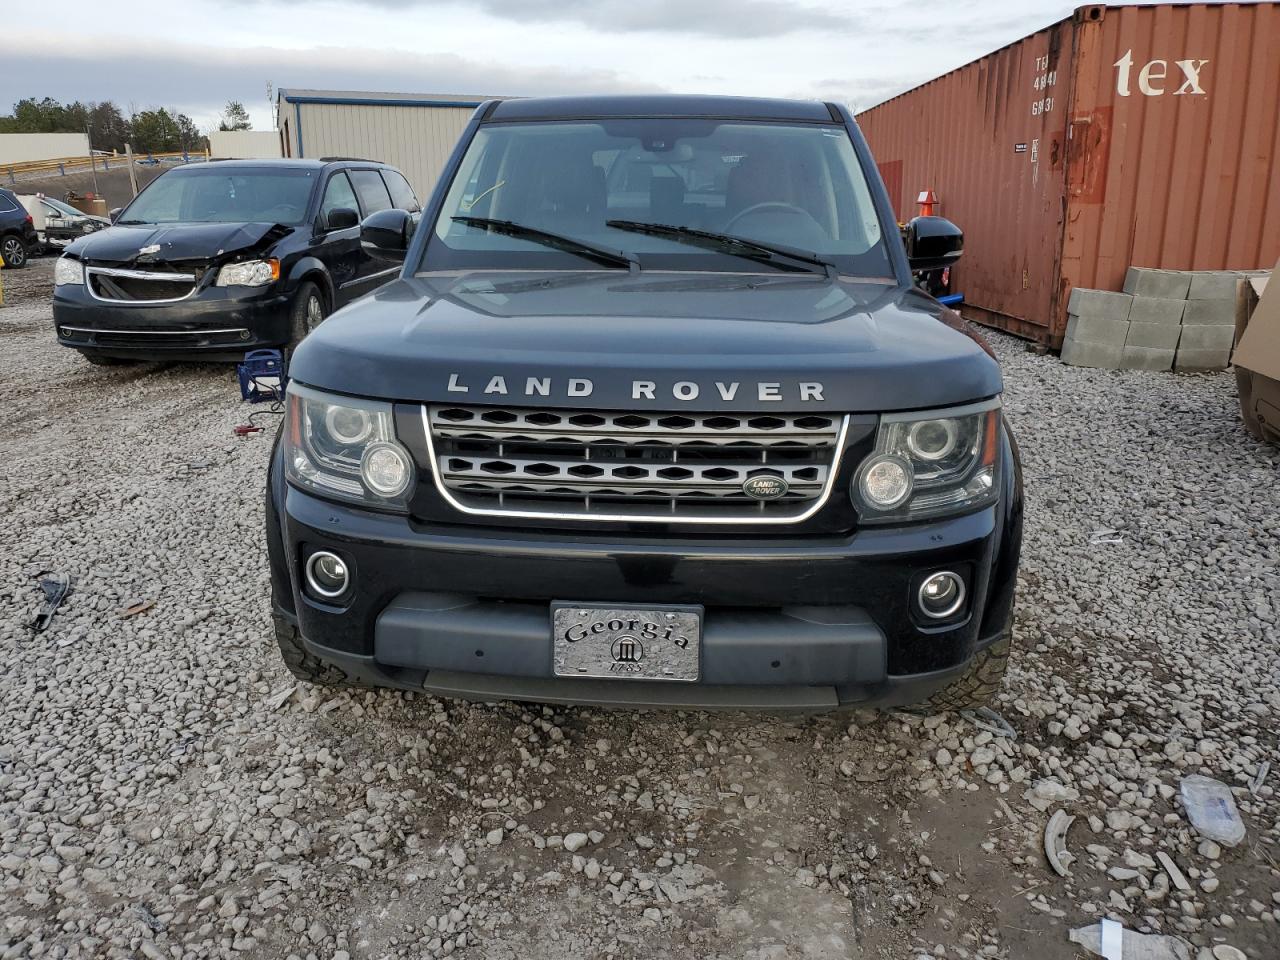 SALAG2V67FA****** Used and Repairable 2015 Land Rover LR4 in Alabama State